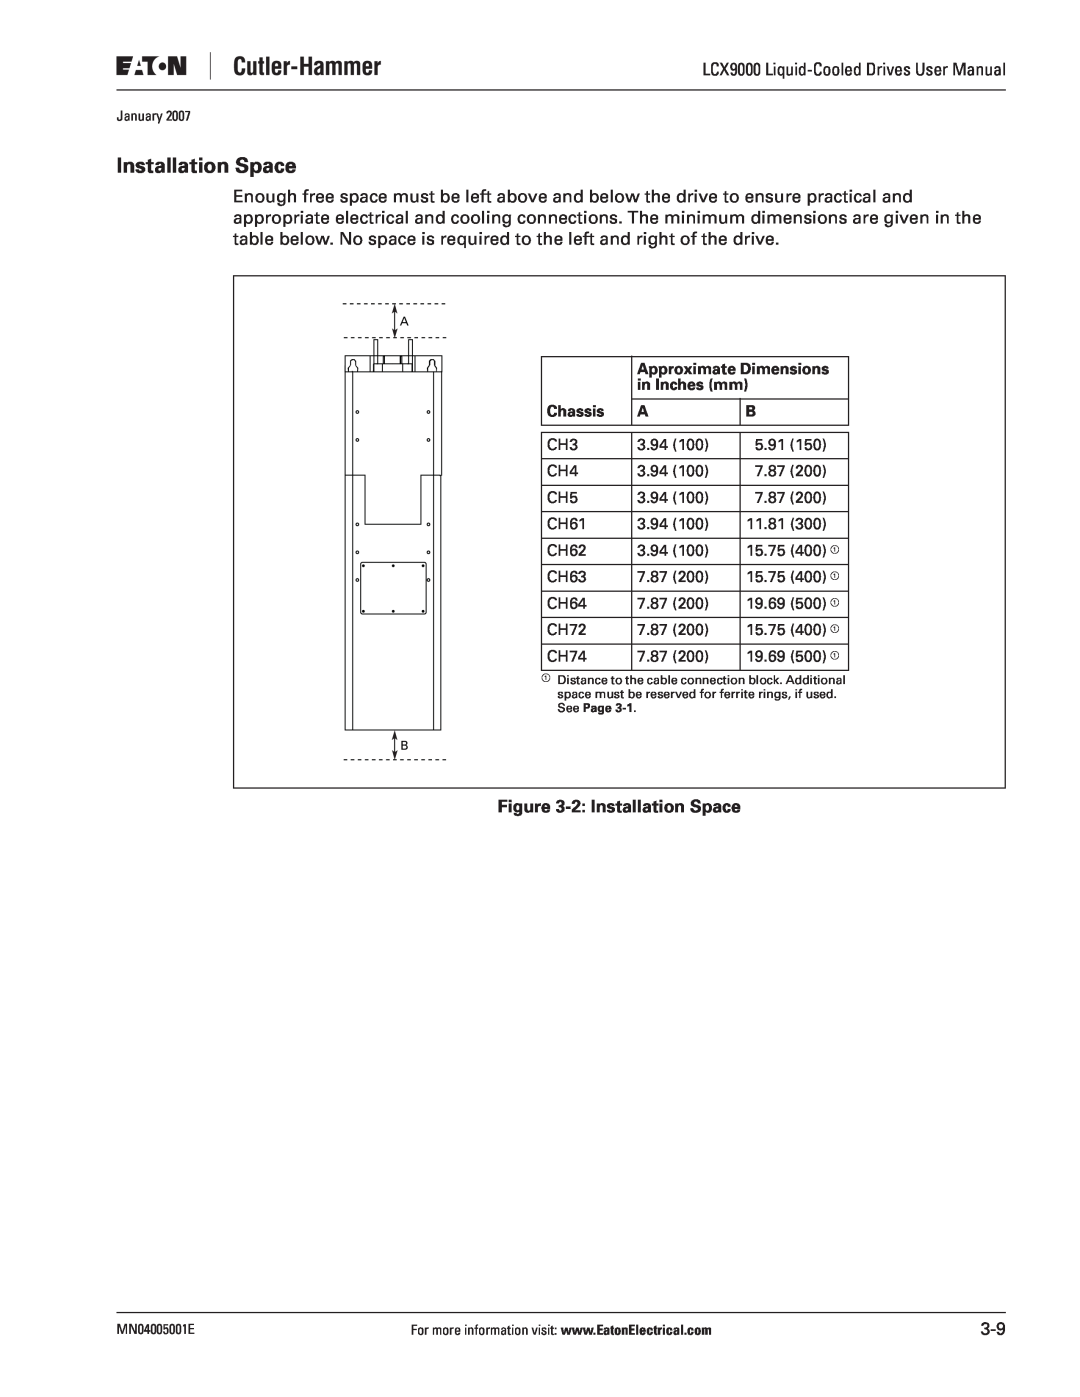 J. T. Eaton LCX9000 user manual 2 Installation Space 